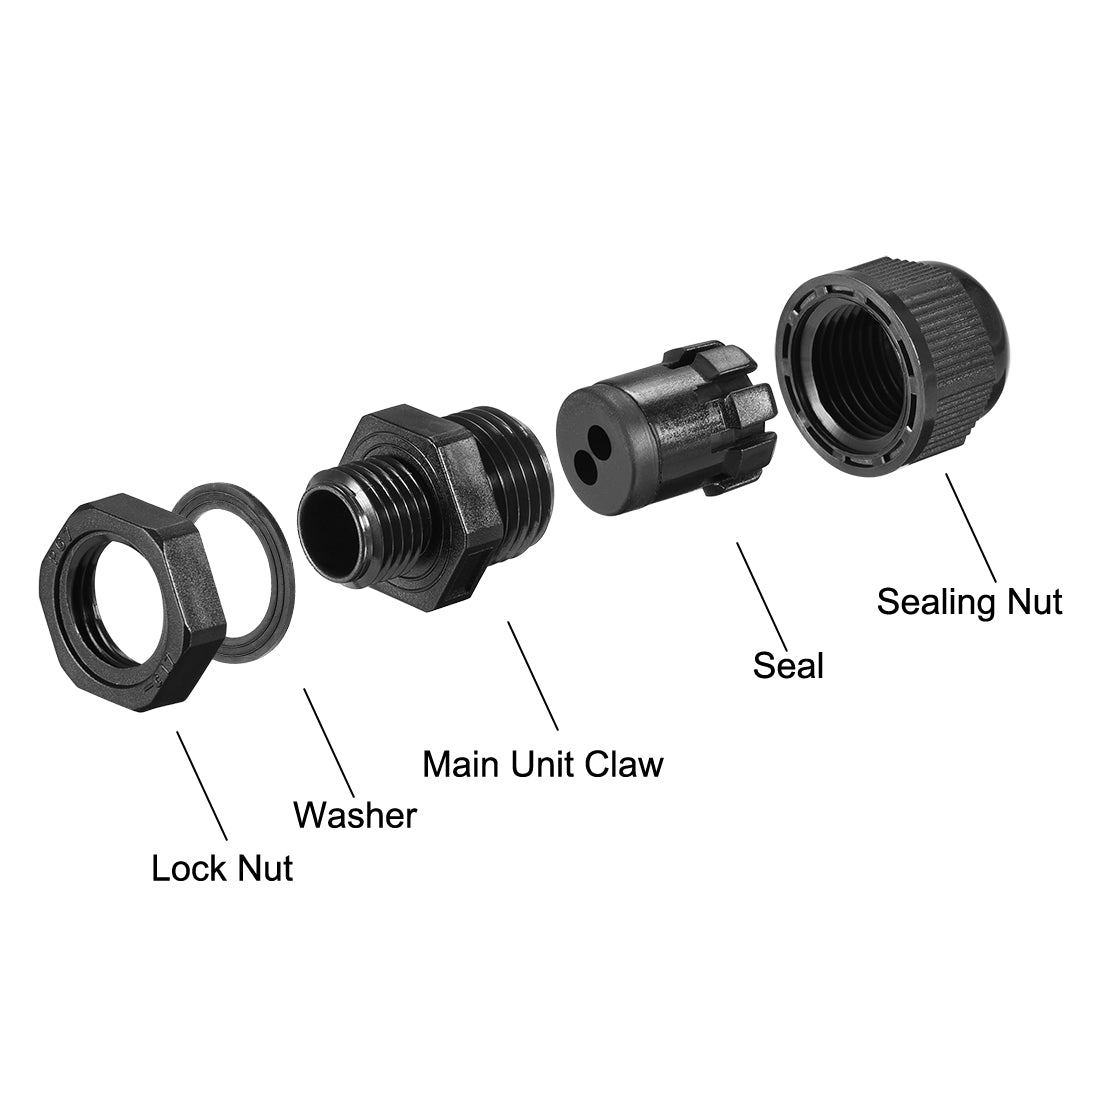 uxcell Uxcell PG7 Cable Gland 2 Holes Waterproof IP68 Nylon Joint Adjustable Locknut for 2-3.1mm Dia Wire